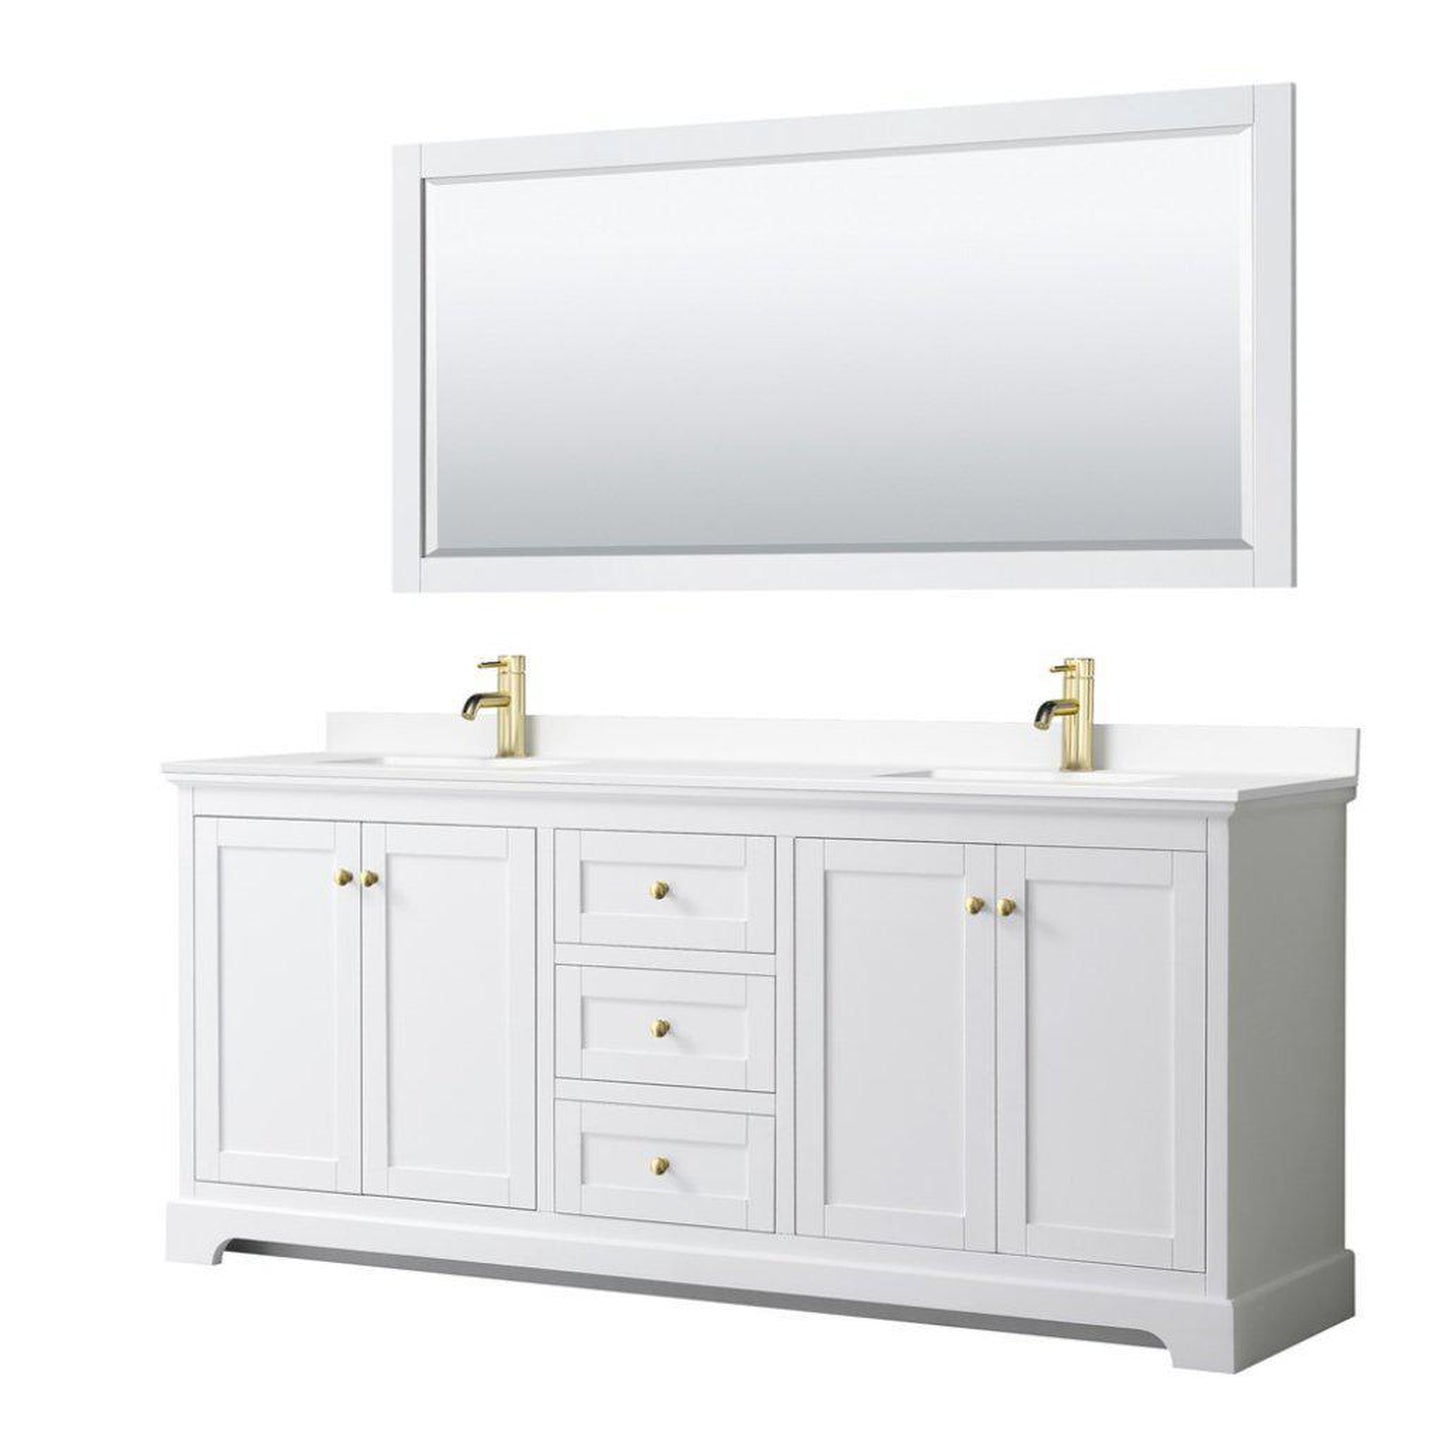 Wyndham Collection Avery 80" White Double Bathroom Vanity Set, White Cultured Marble Countertop With 1-Hole Faucet, Square Sink, 70" Mirror, Gold Trims